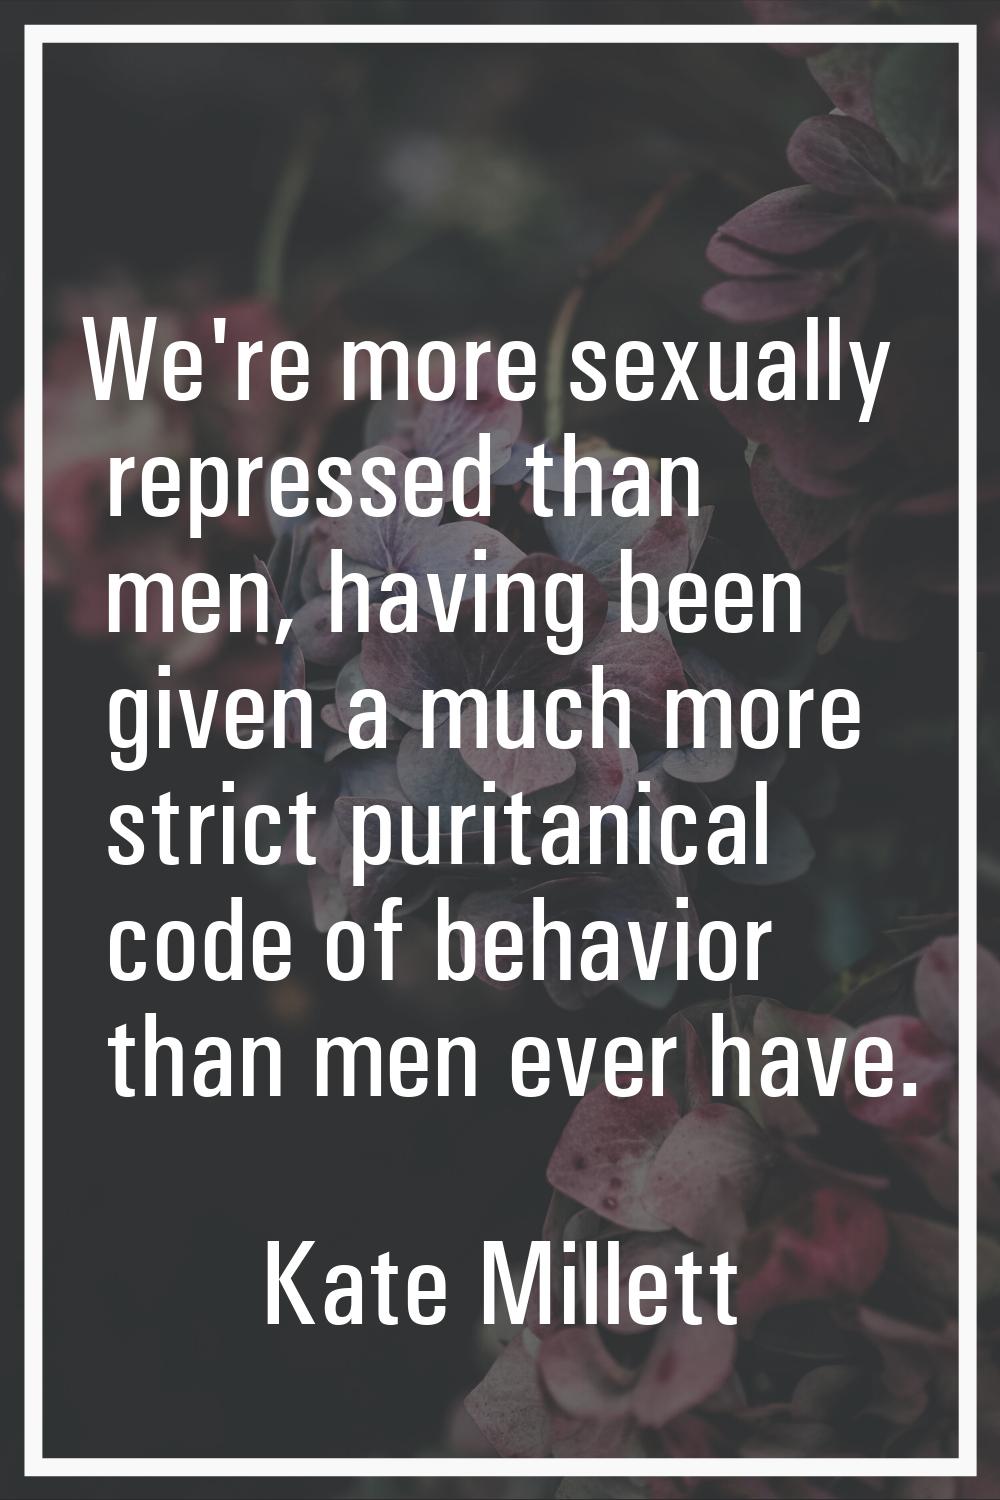 We're more sexually repressed than men, having been given a much more strict puritanical code of be